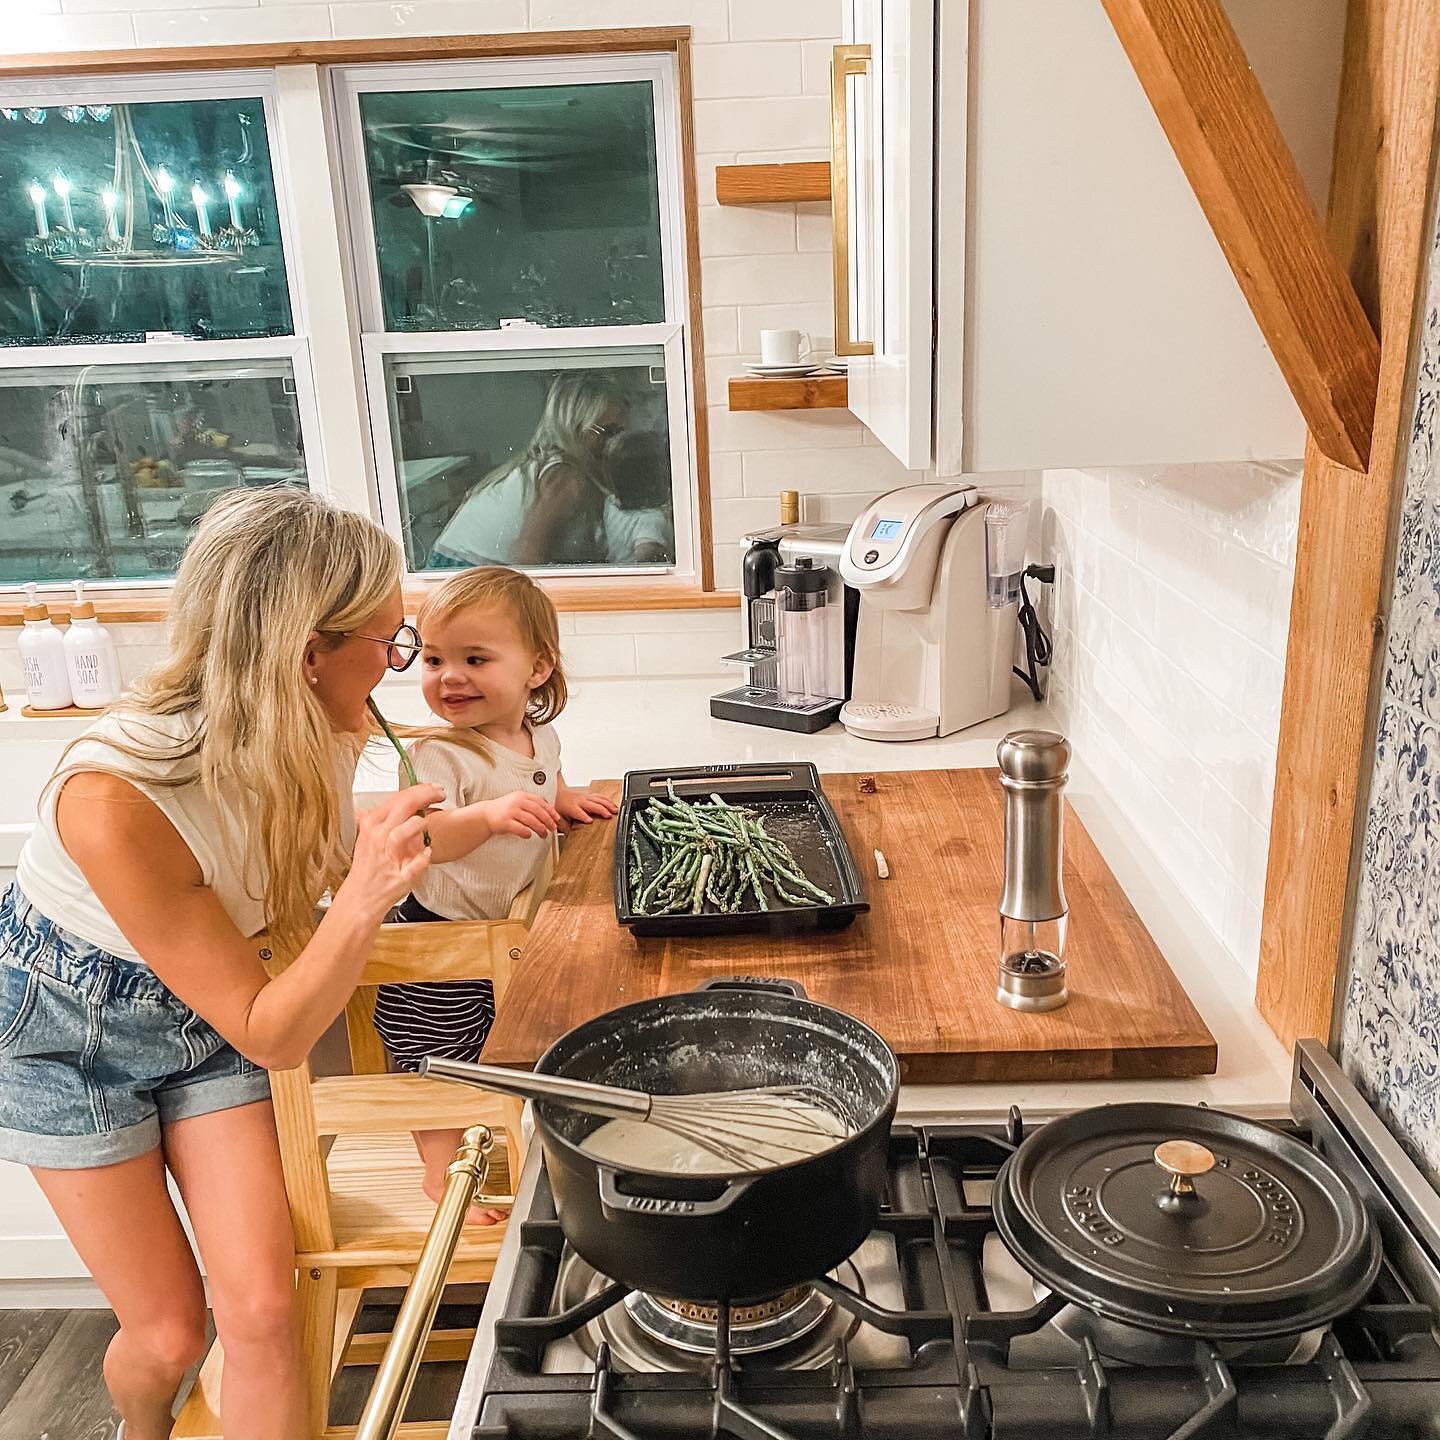 Happy Sunday, friends! We&rsquo;ve spent a lot of time in our finally completed kitchen this weekend! So I just wanted to share and encourage you to cook a great Sunday dinner tonight! Nothing beats a great Sunday dinner. Happy week! #cooktaleshome